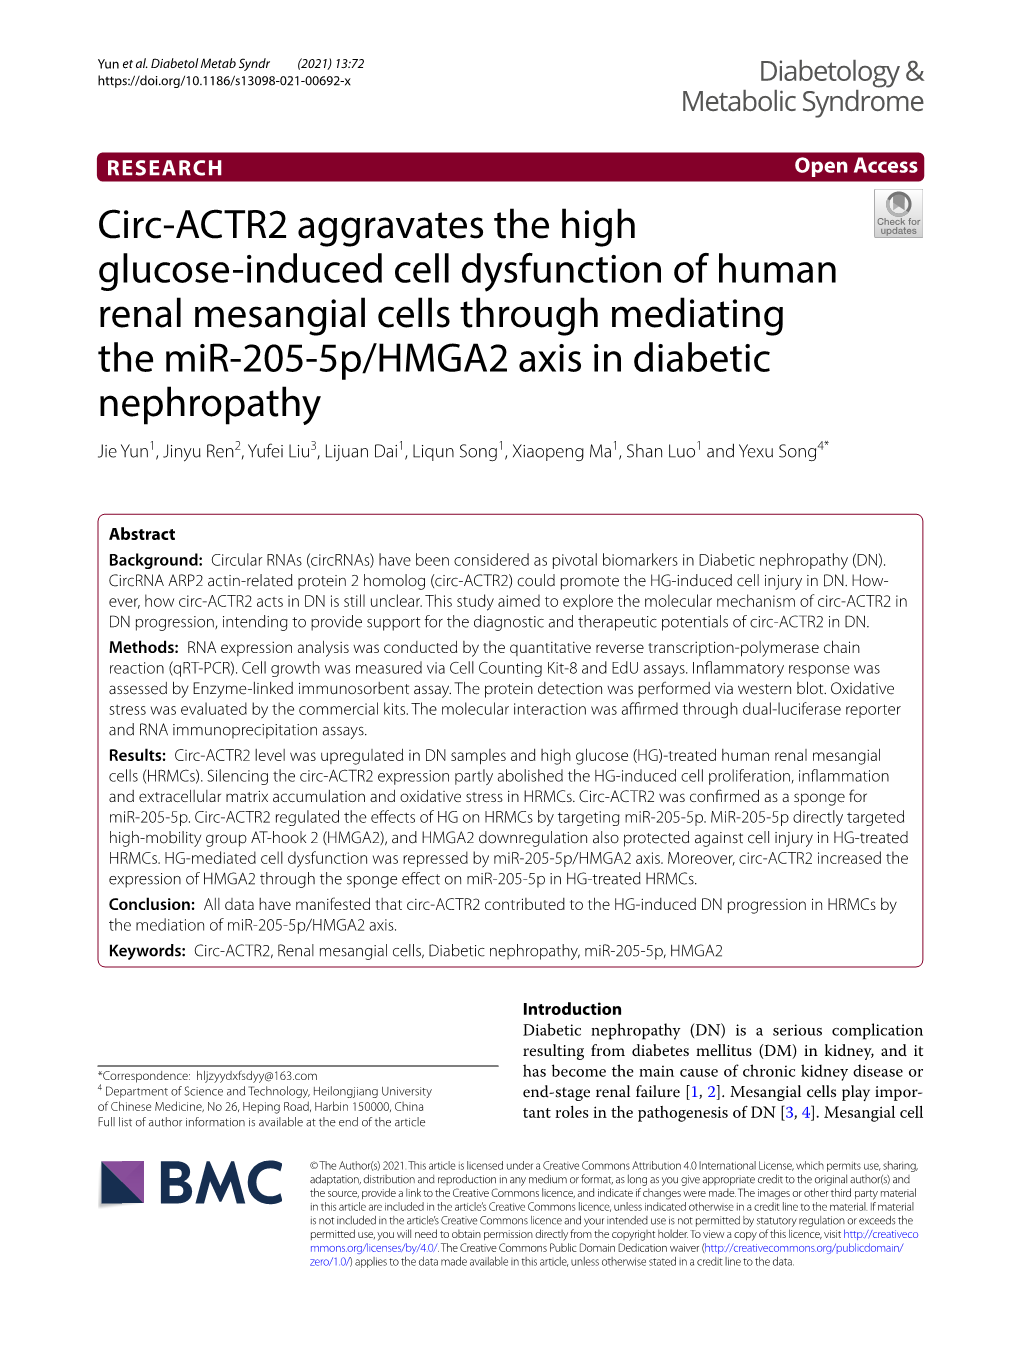 Circ-ACTR2 Aggravates the High Glucose-Induced Cell Dysfunction Of